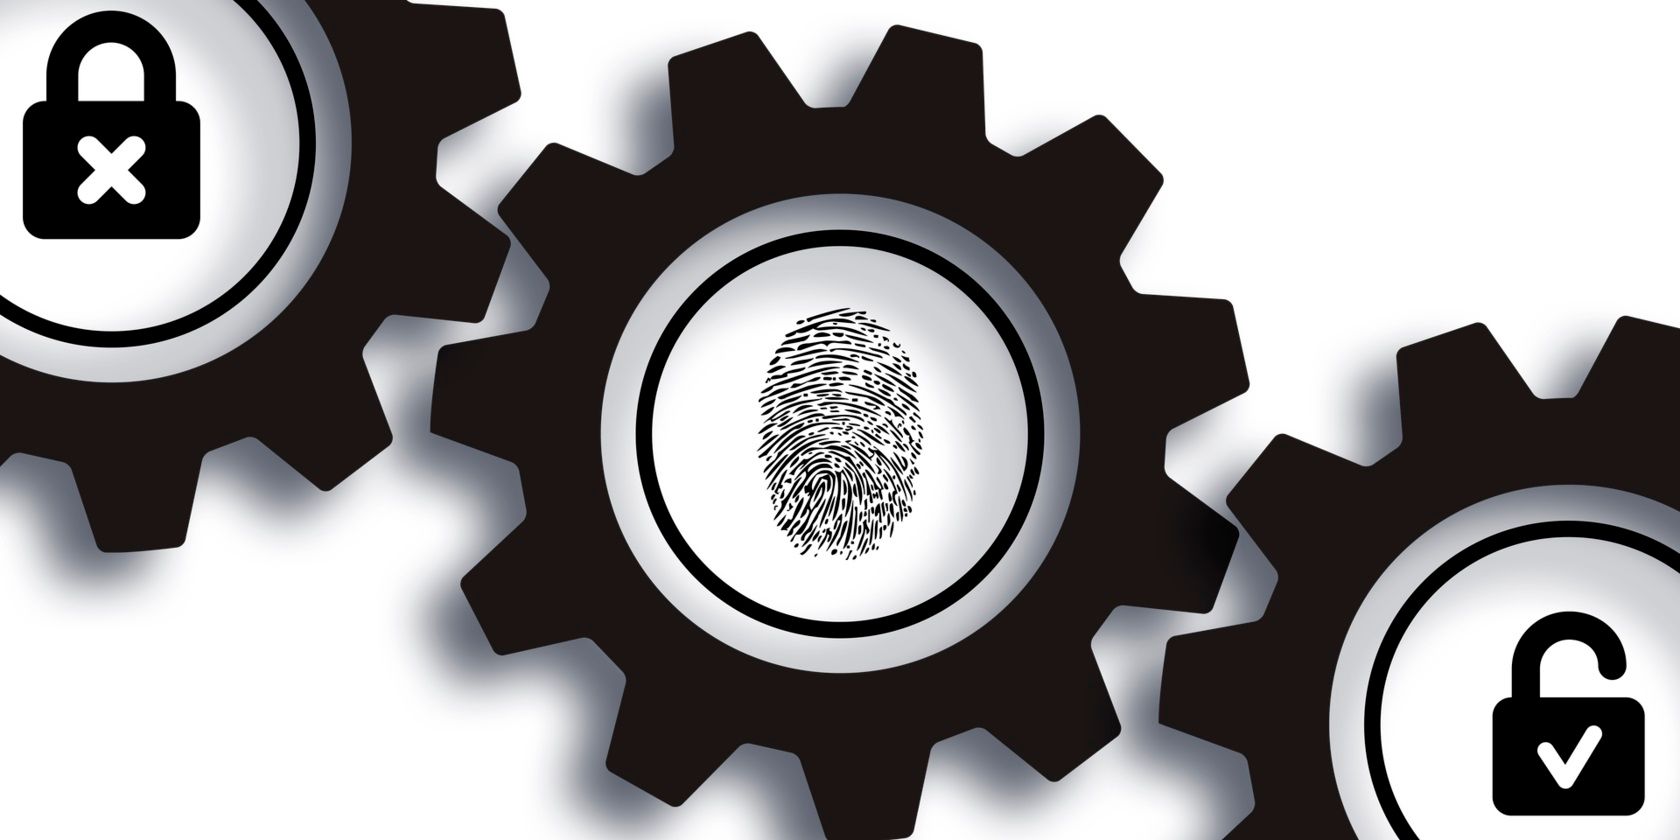 Illustration of gears locks and a finger print